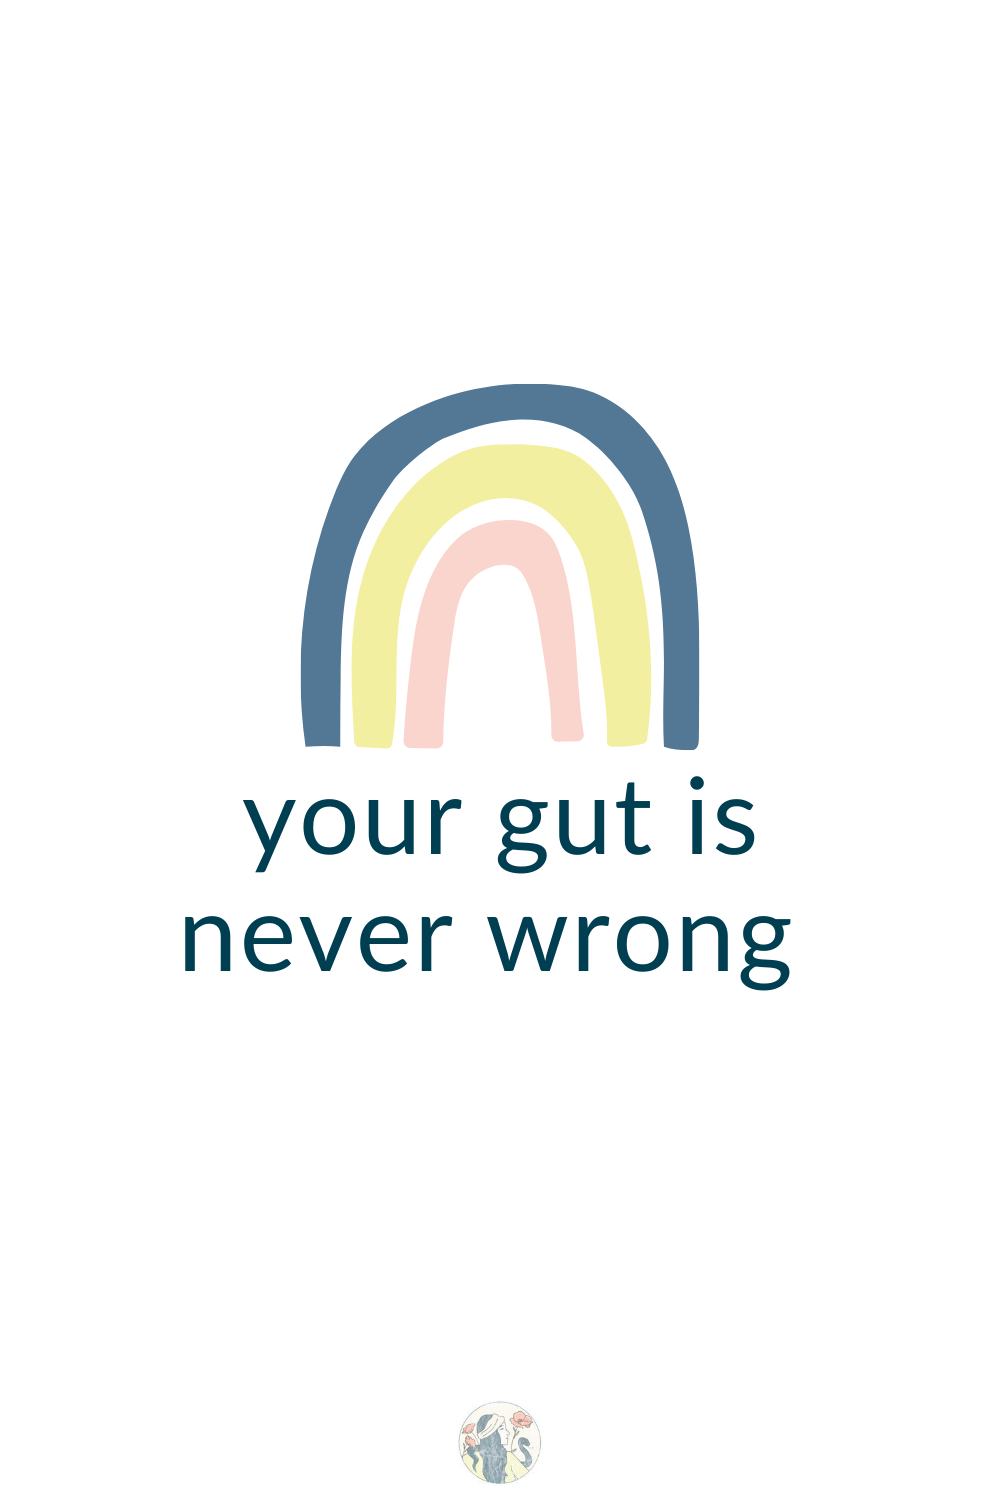 your gut is never wrong .png